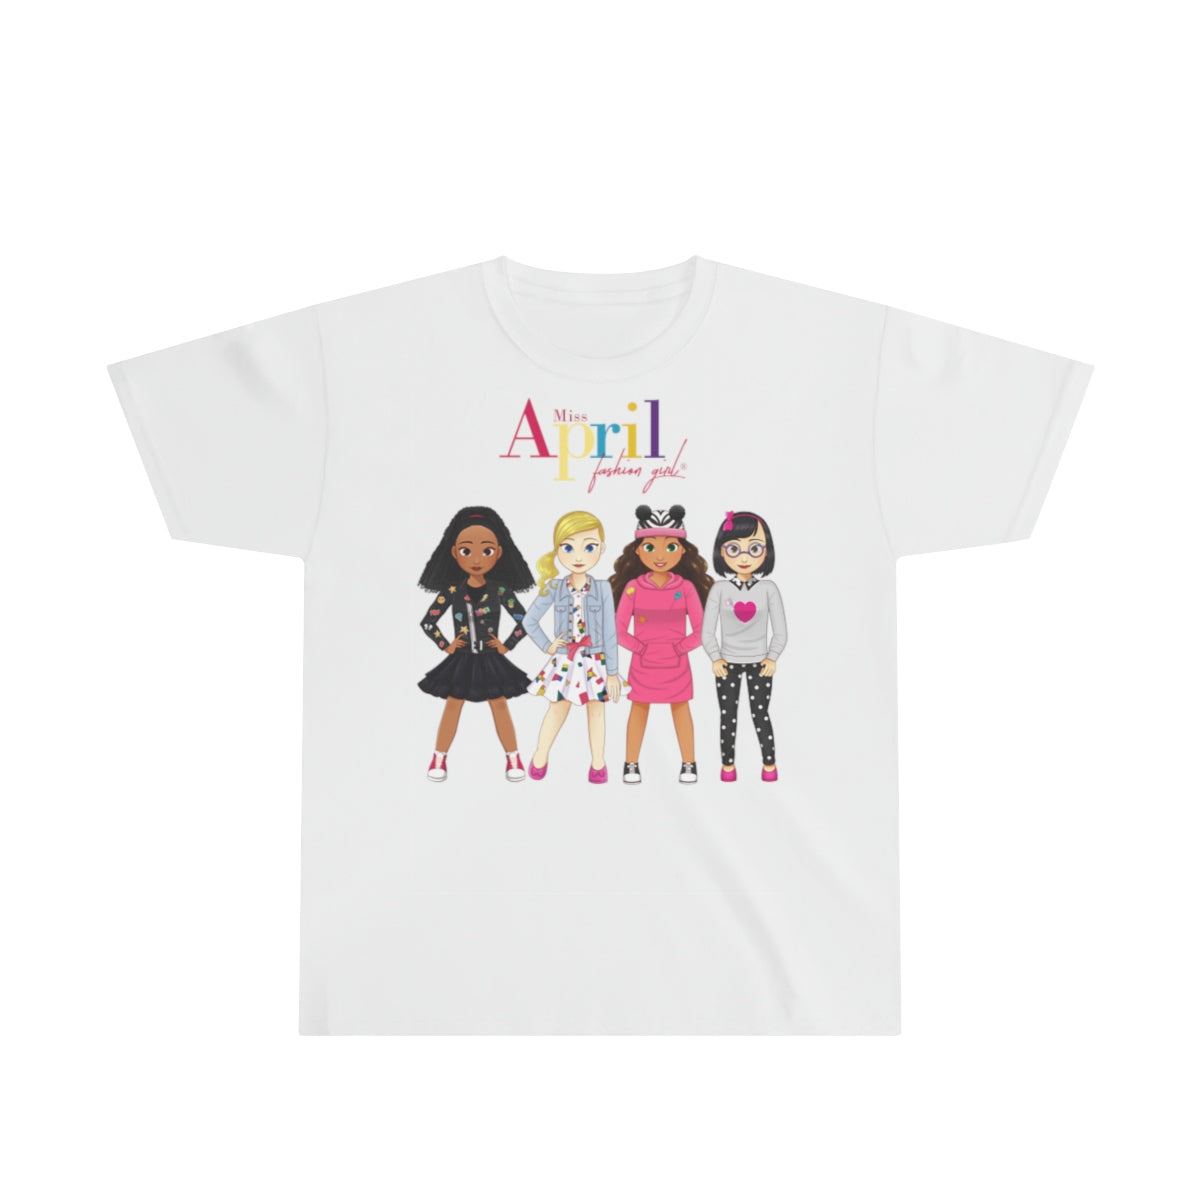 MISS APRIL FASHION GIRL Youth Ultra Cotton Tee (best fashion friends)